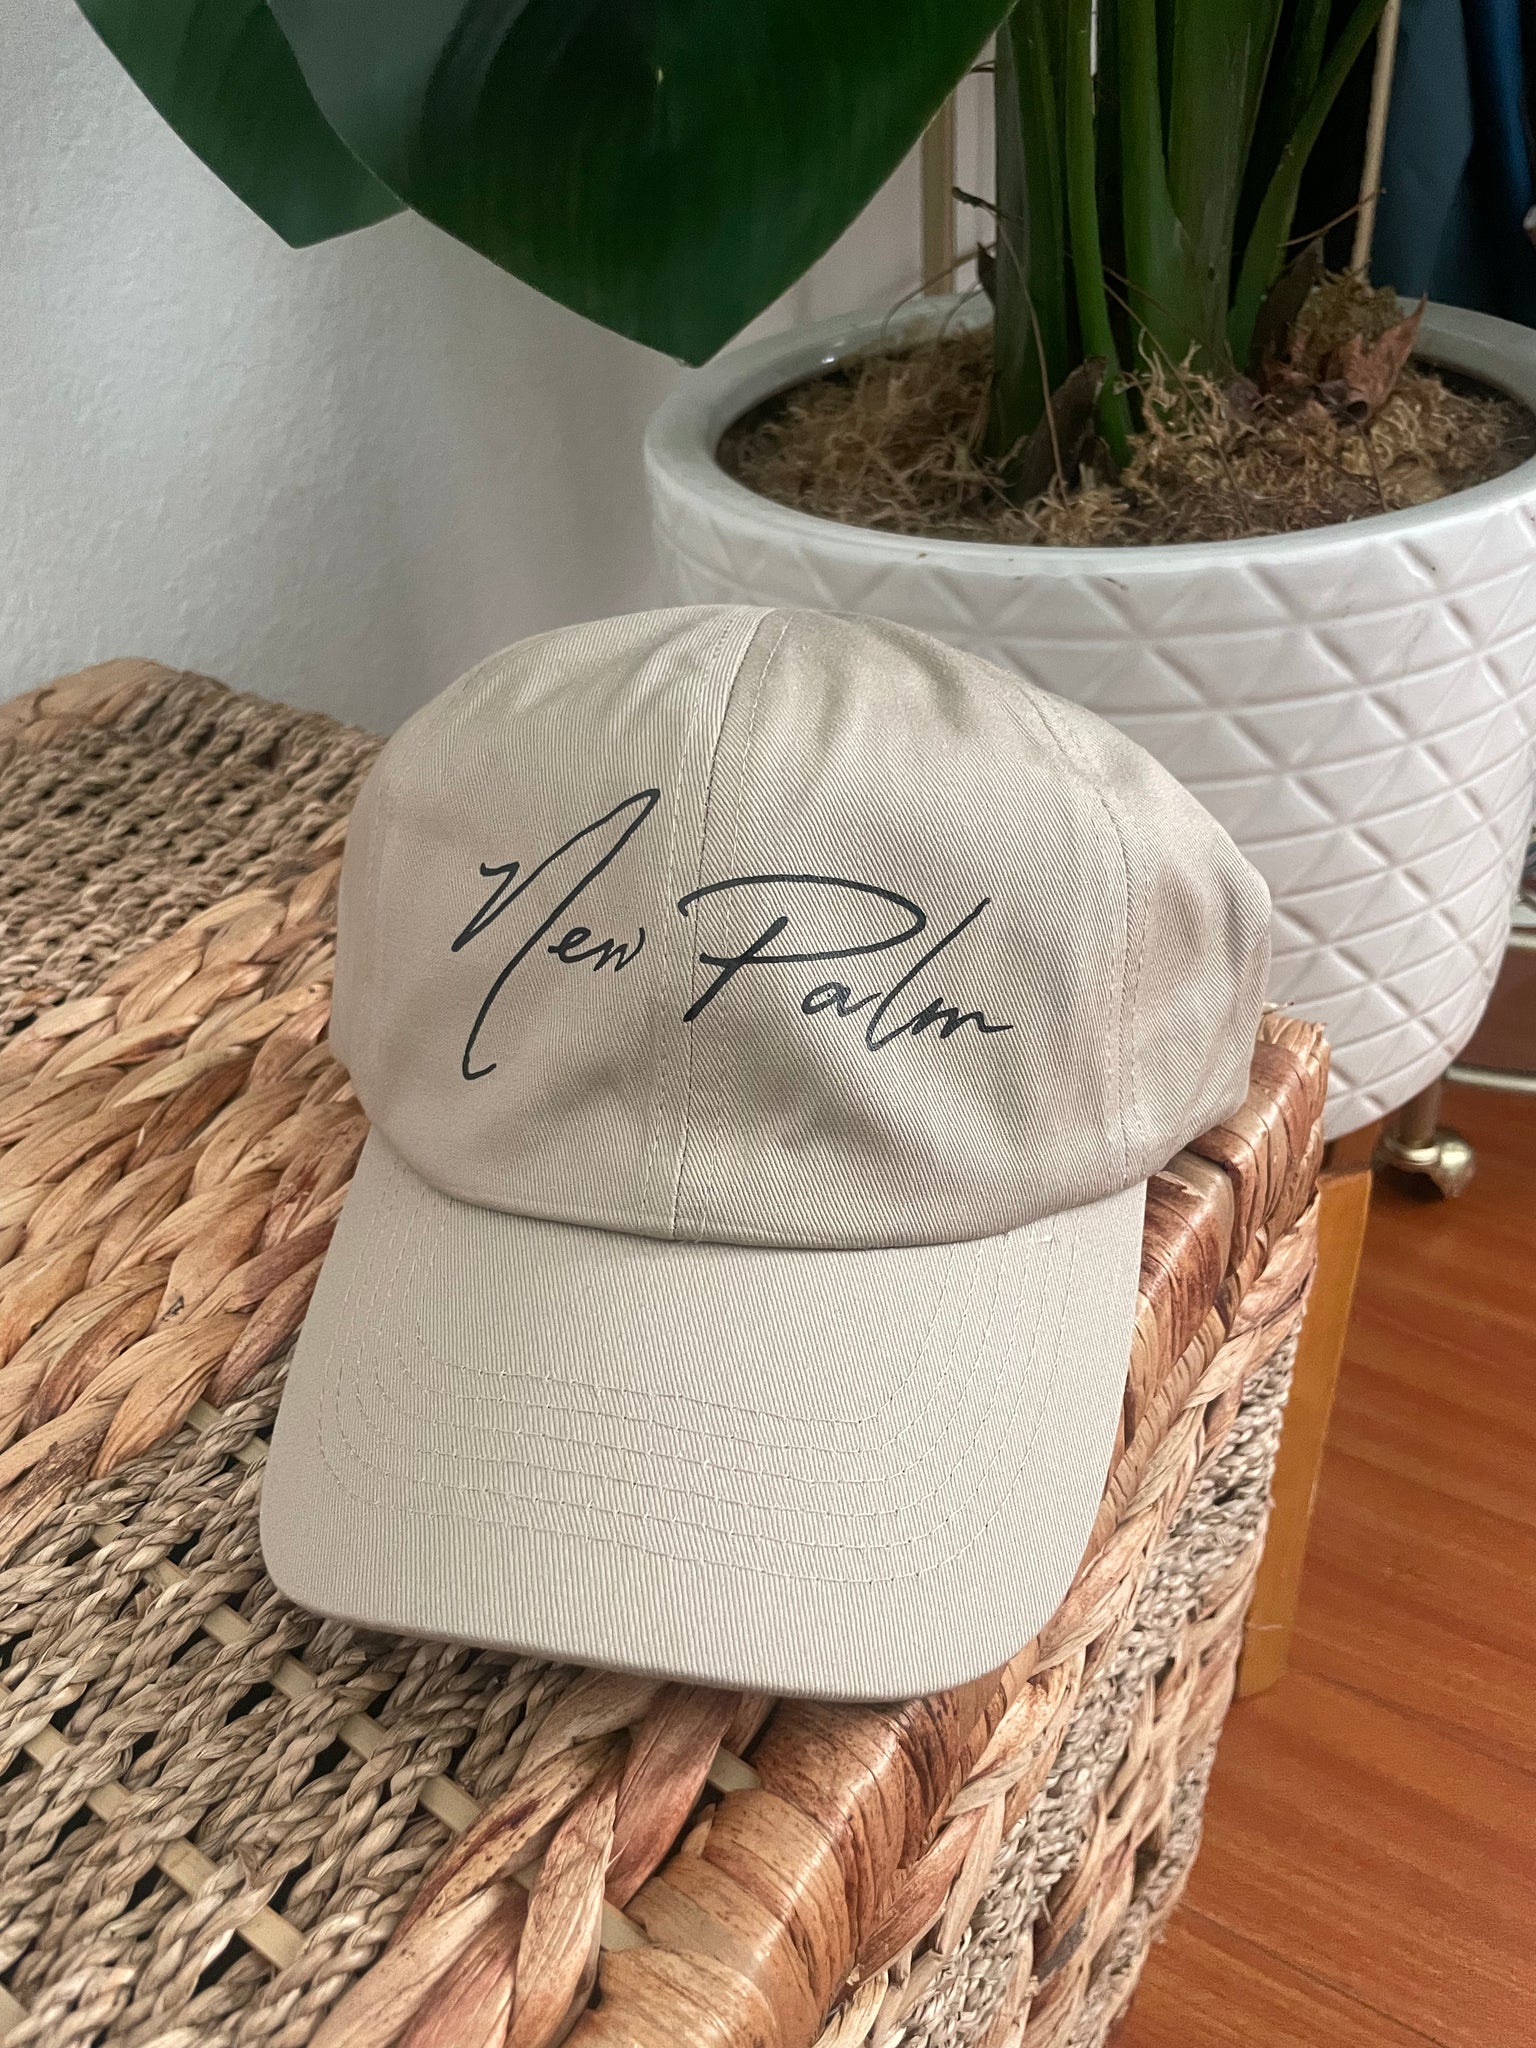 New Palm dad hat - NewPalm Collection